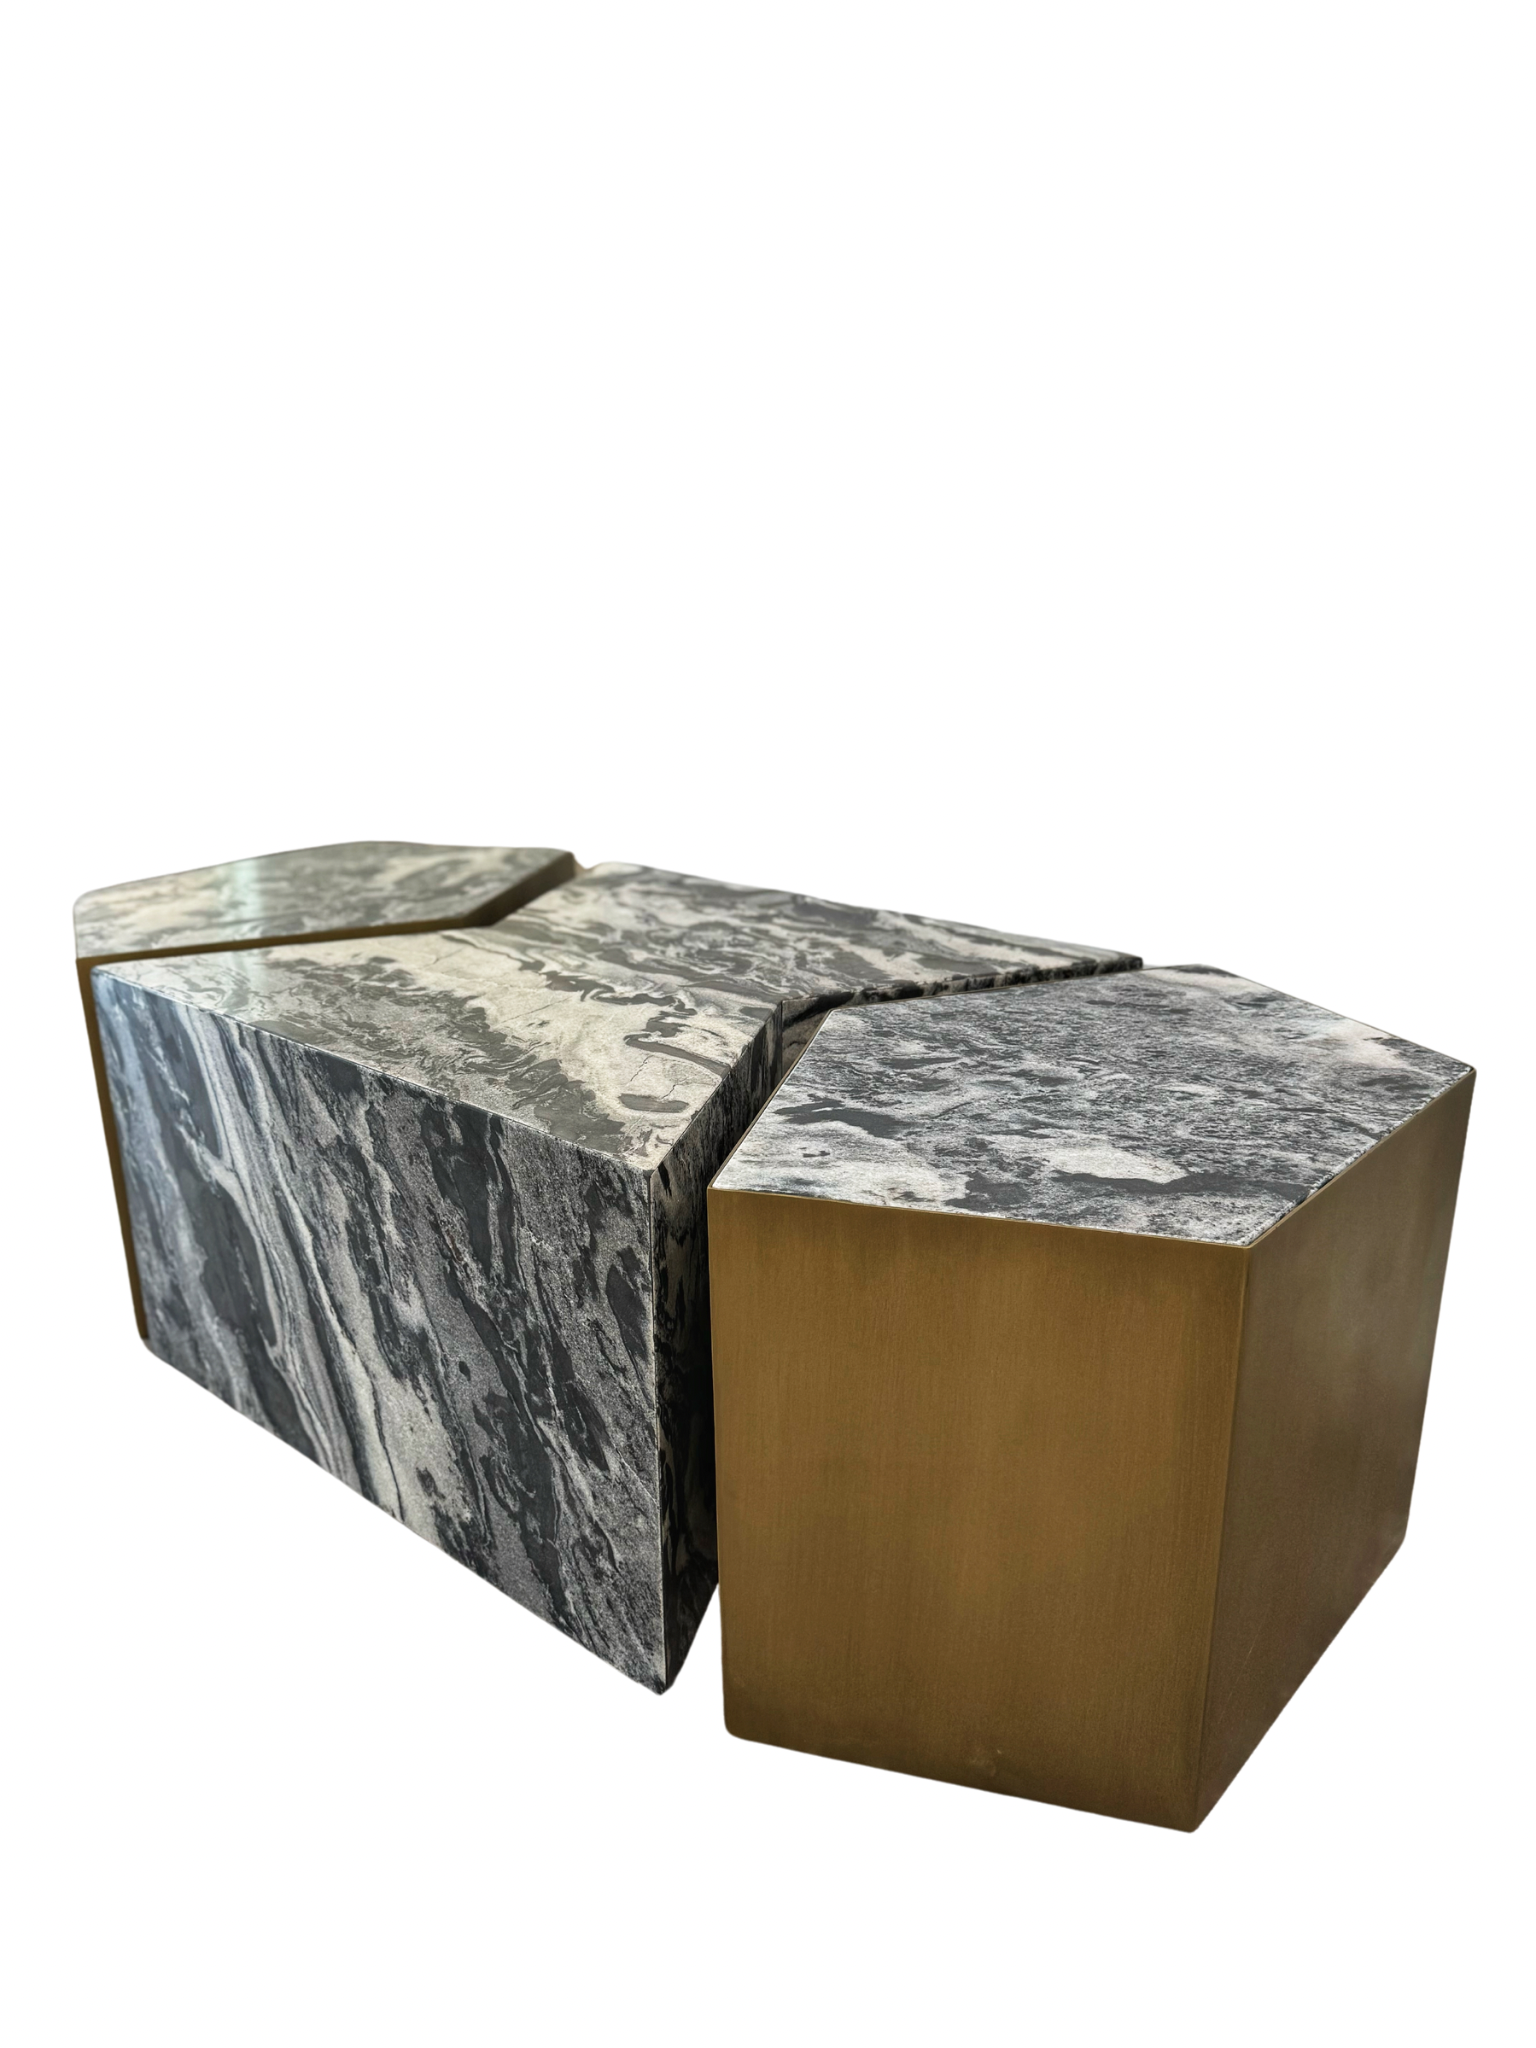 50 S/3 Reverse Marble Coffee Table, Brown